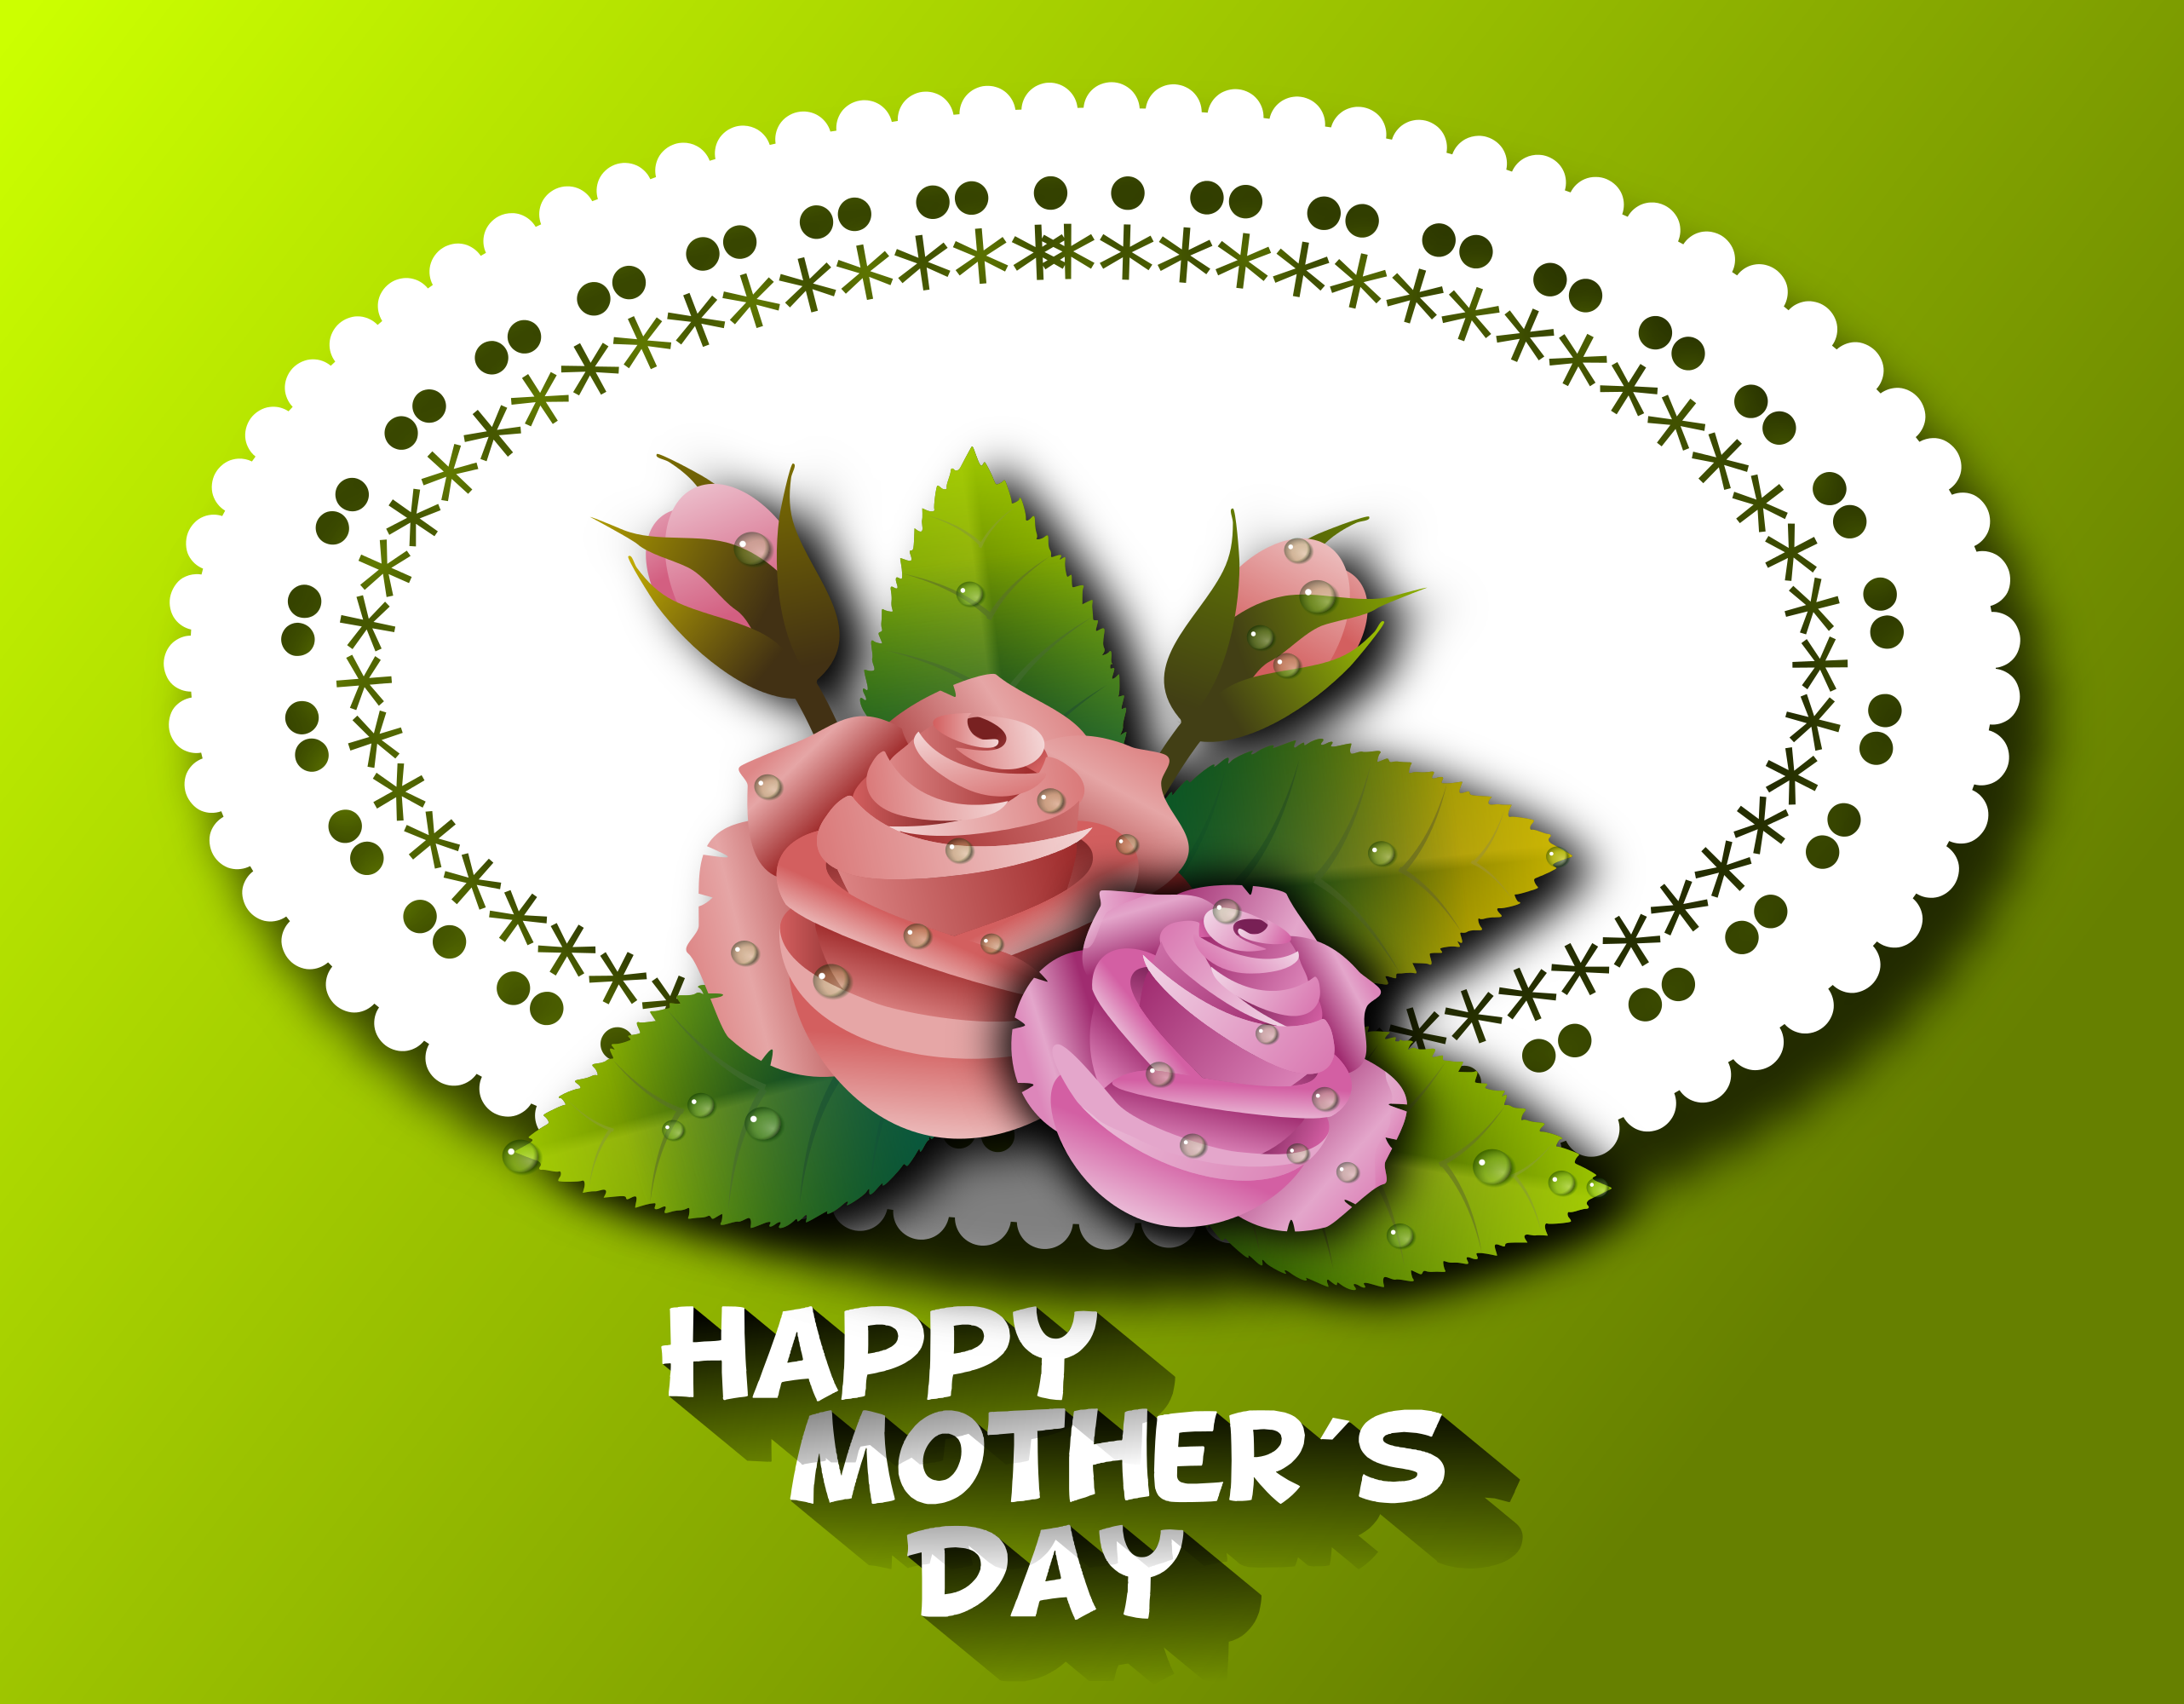 Mothers Day Holiday Card Rose Artistic Green 2564x2000